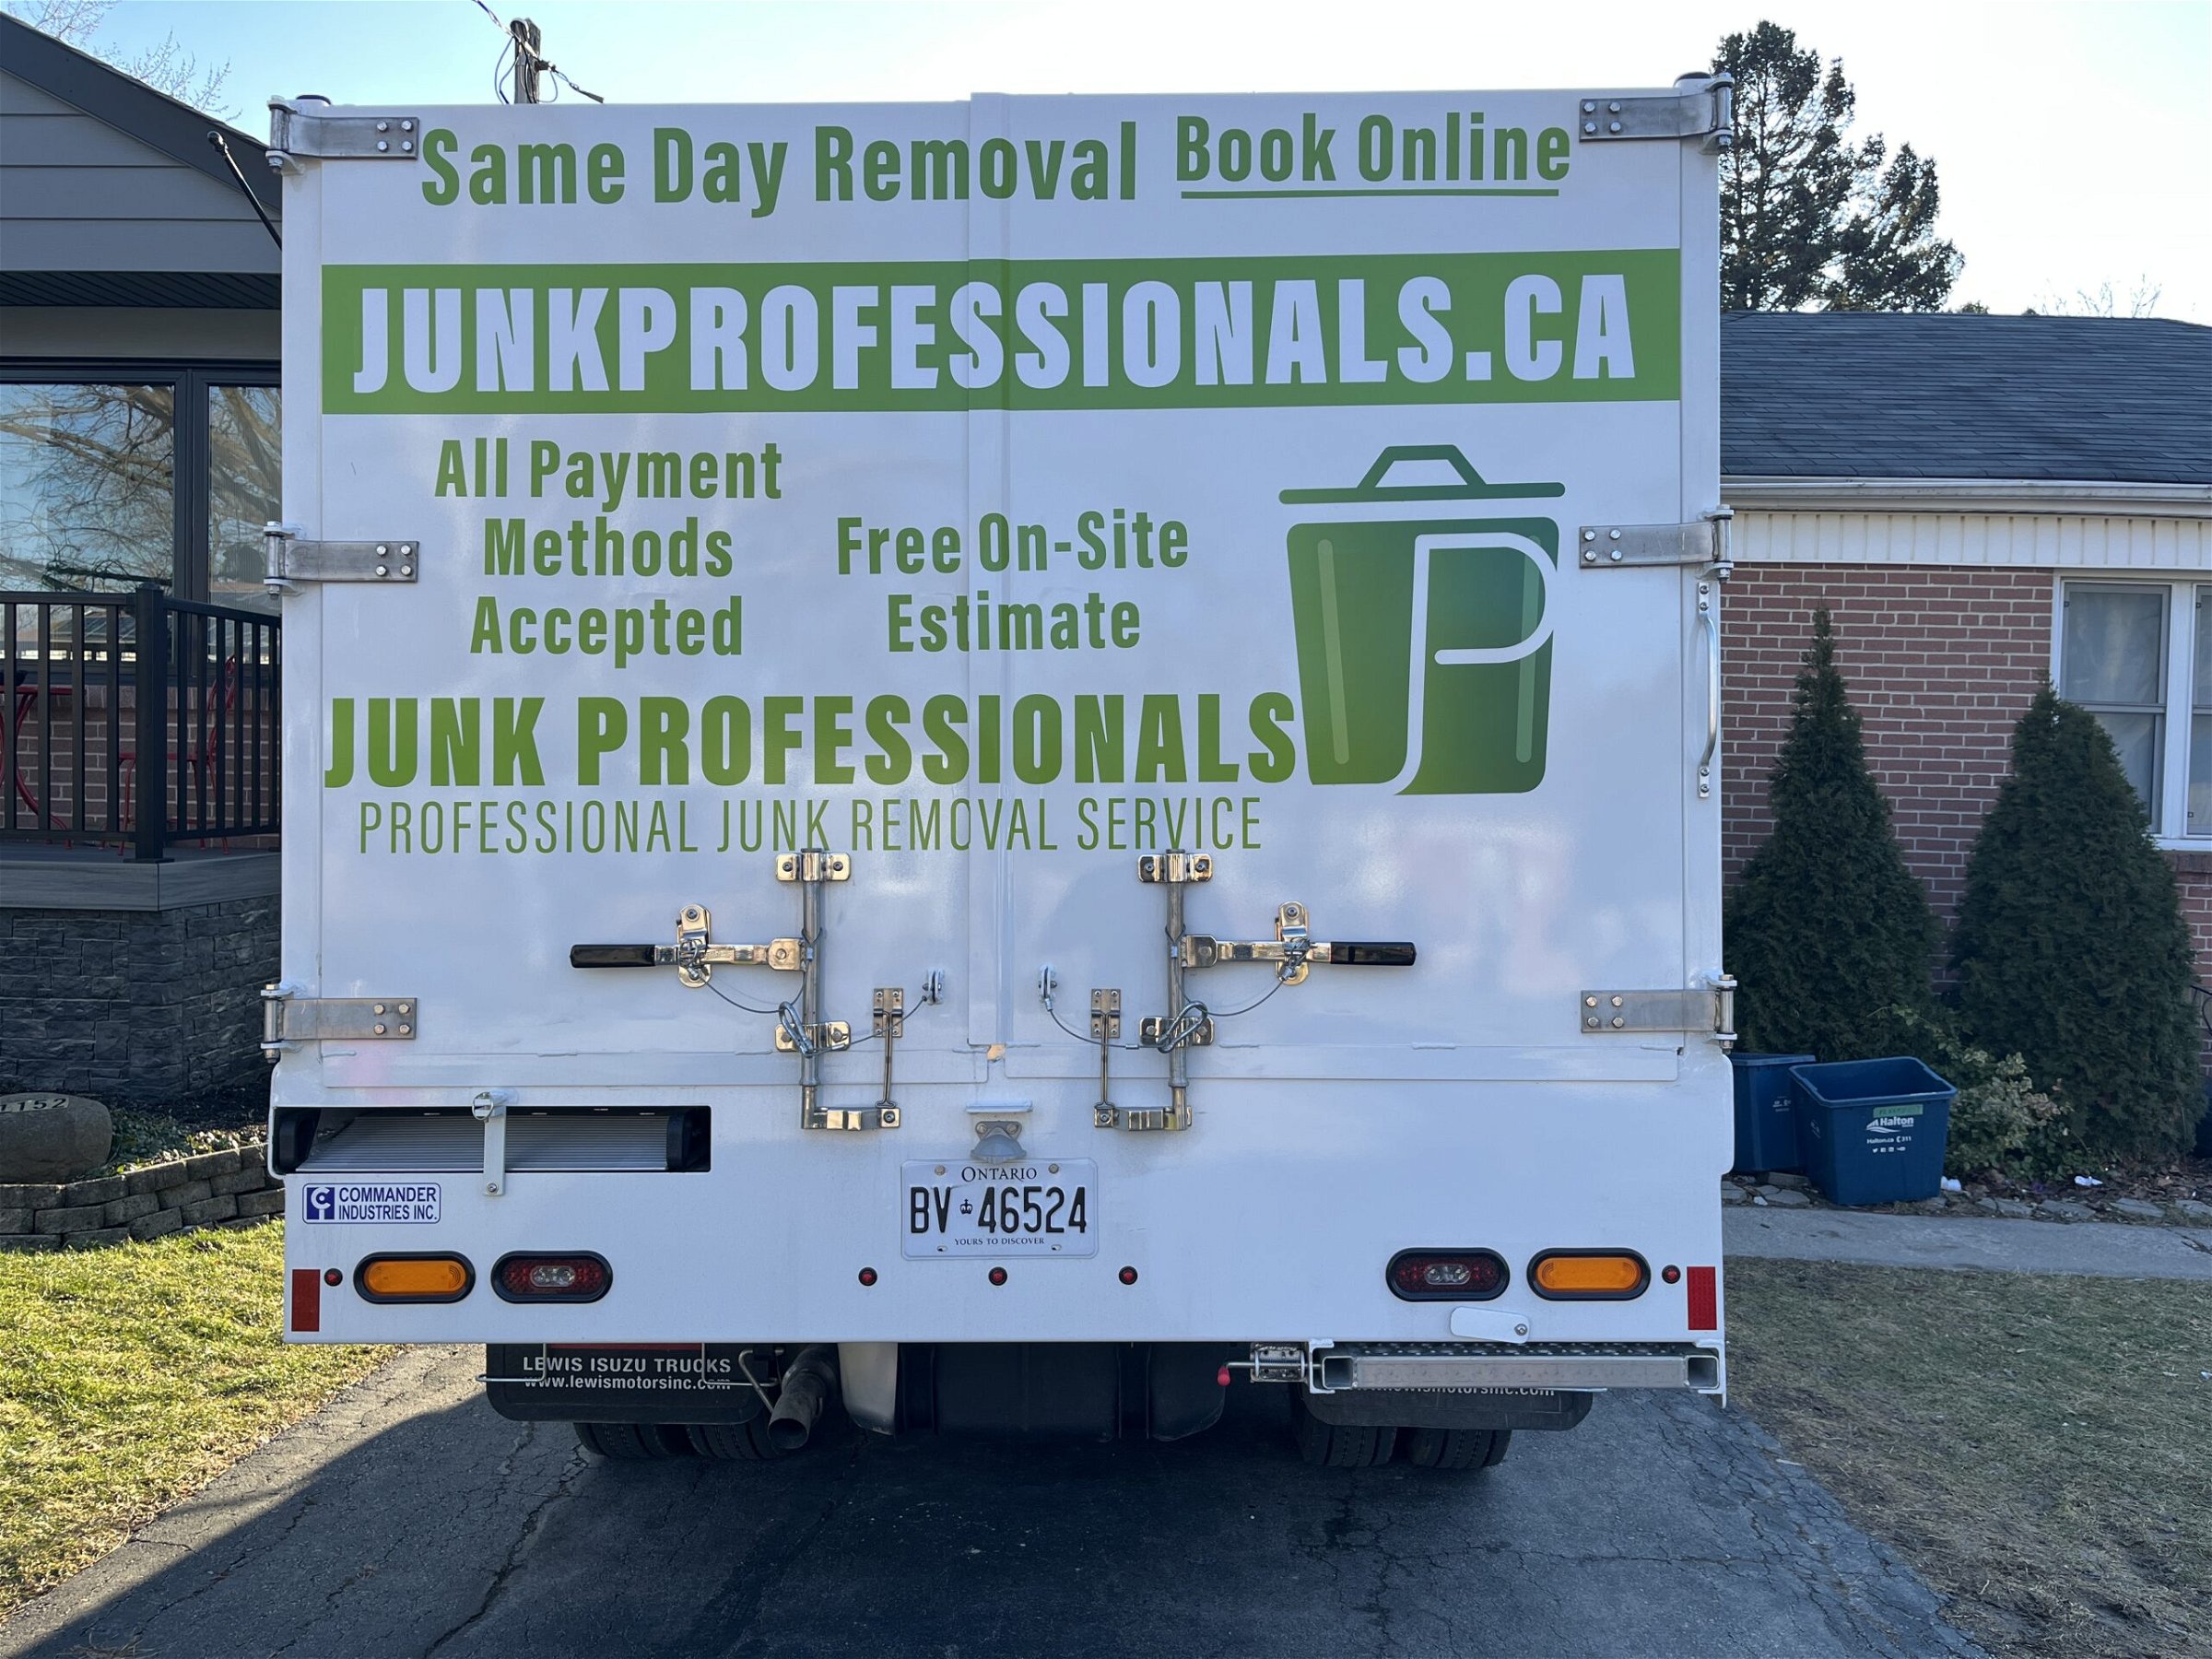 rear view of junk professionals' truck which going to pick up junk